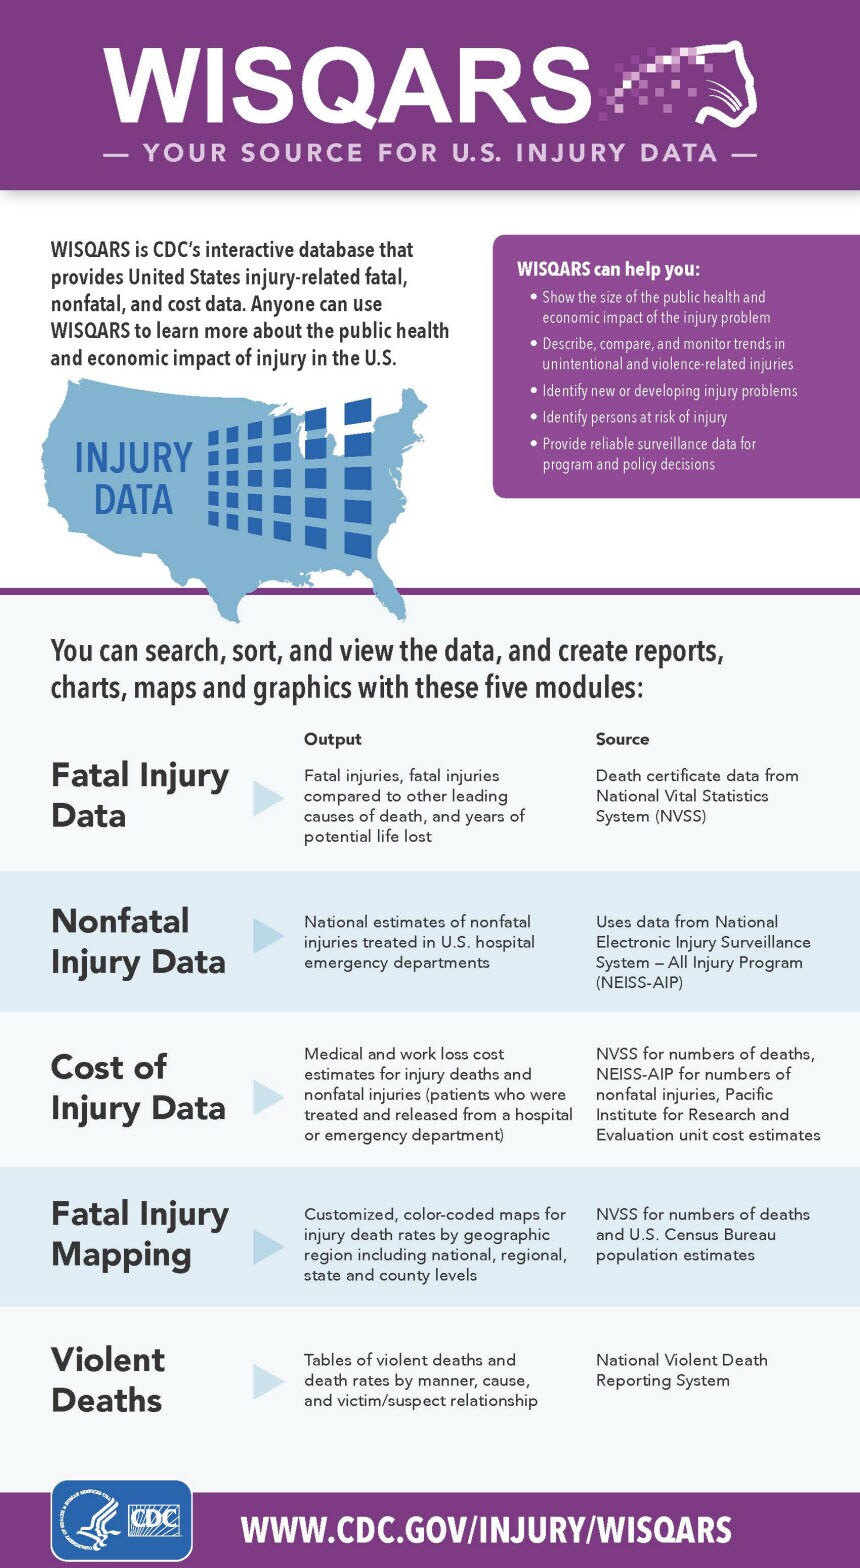 WISQARS: YOUR SOURCE FOR U.S. INJURY DATA. WISQARS is CDC%26rsquo;s interactive database that provides United States injury-related fatal, nonfatal, and cost data.